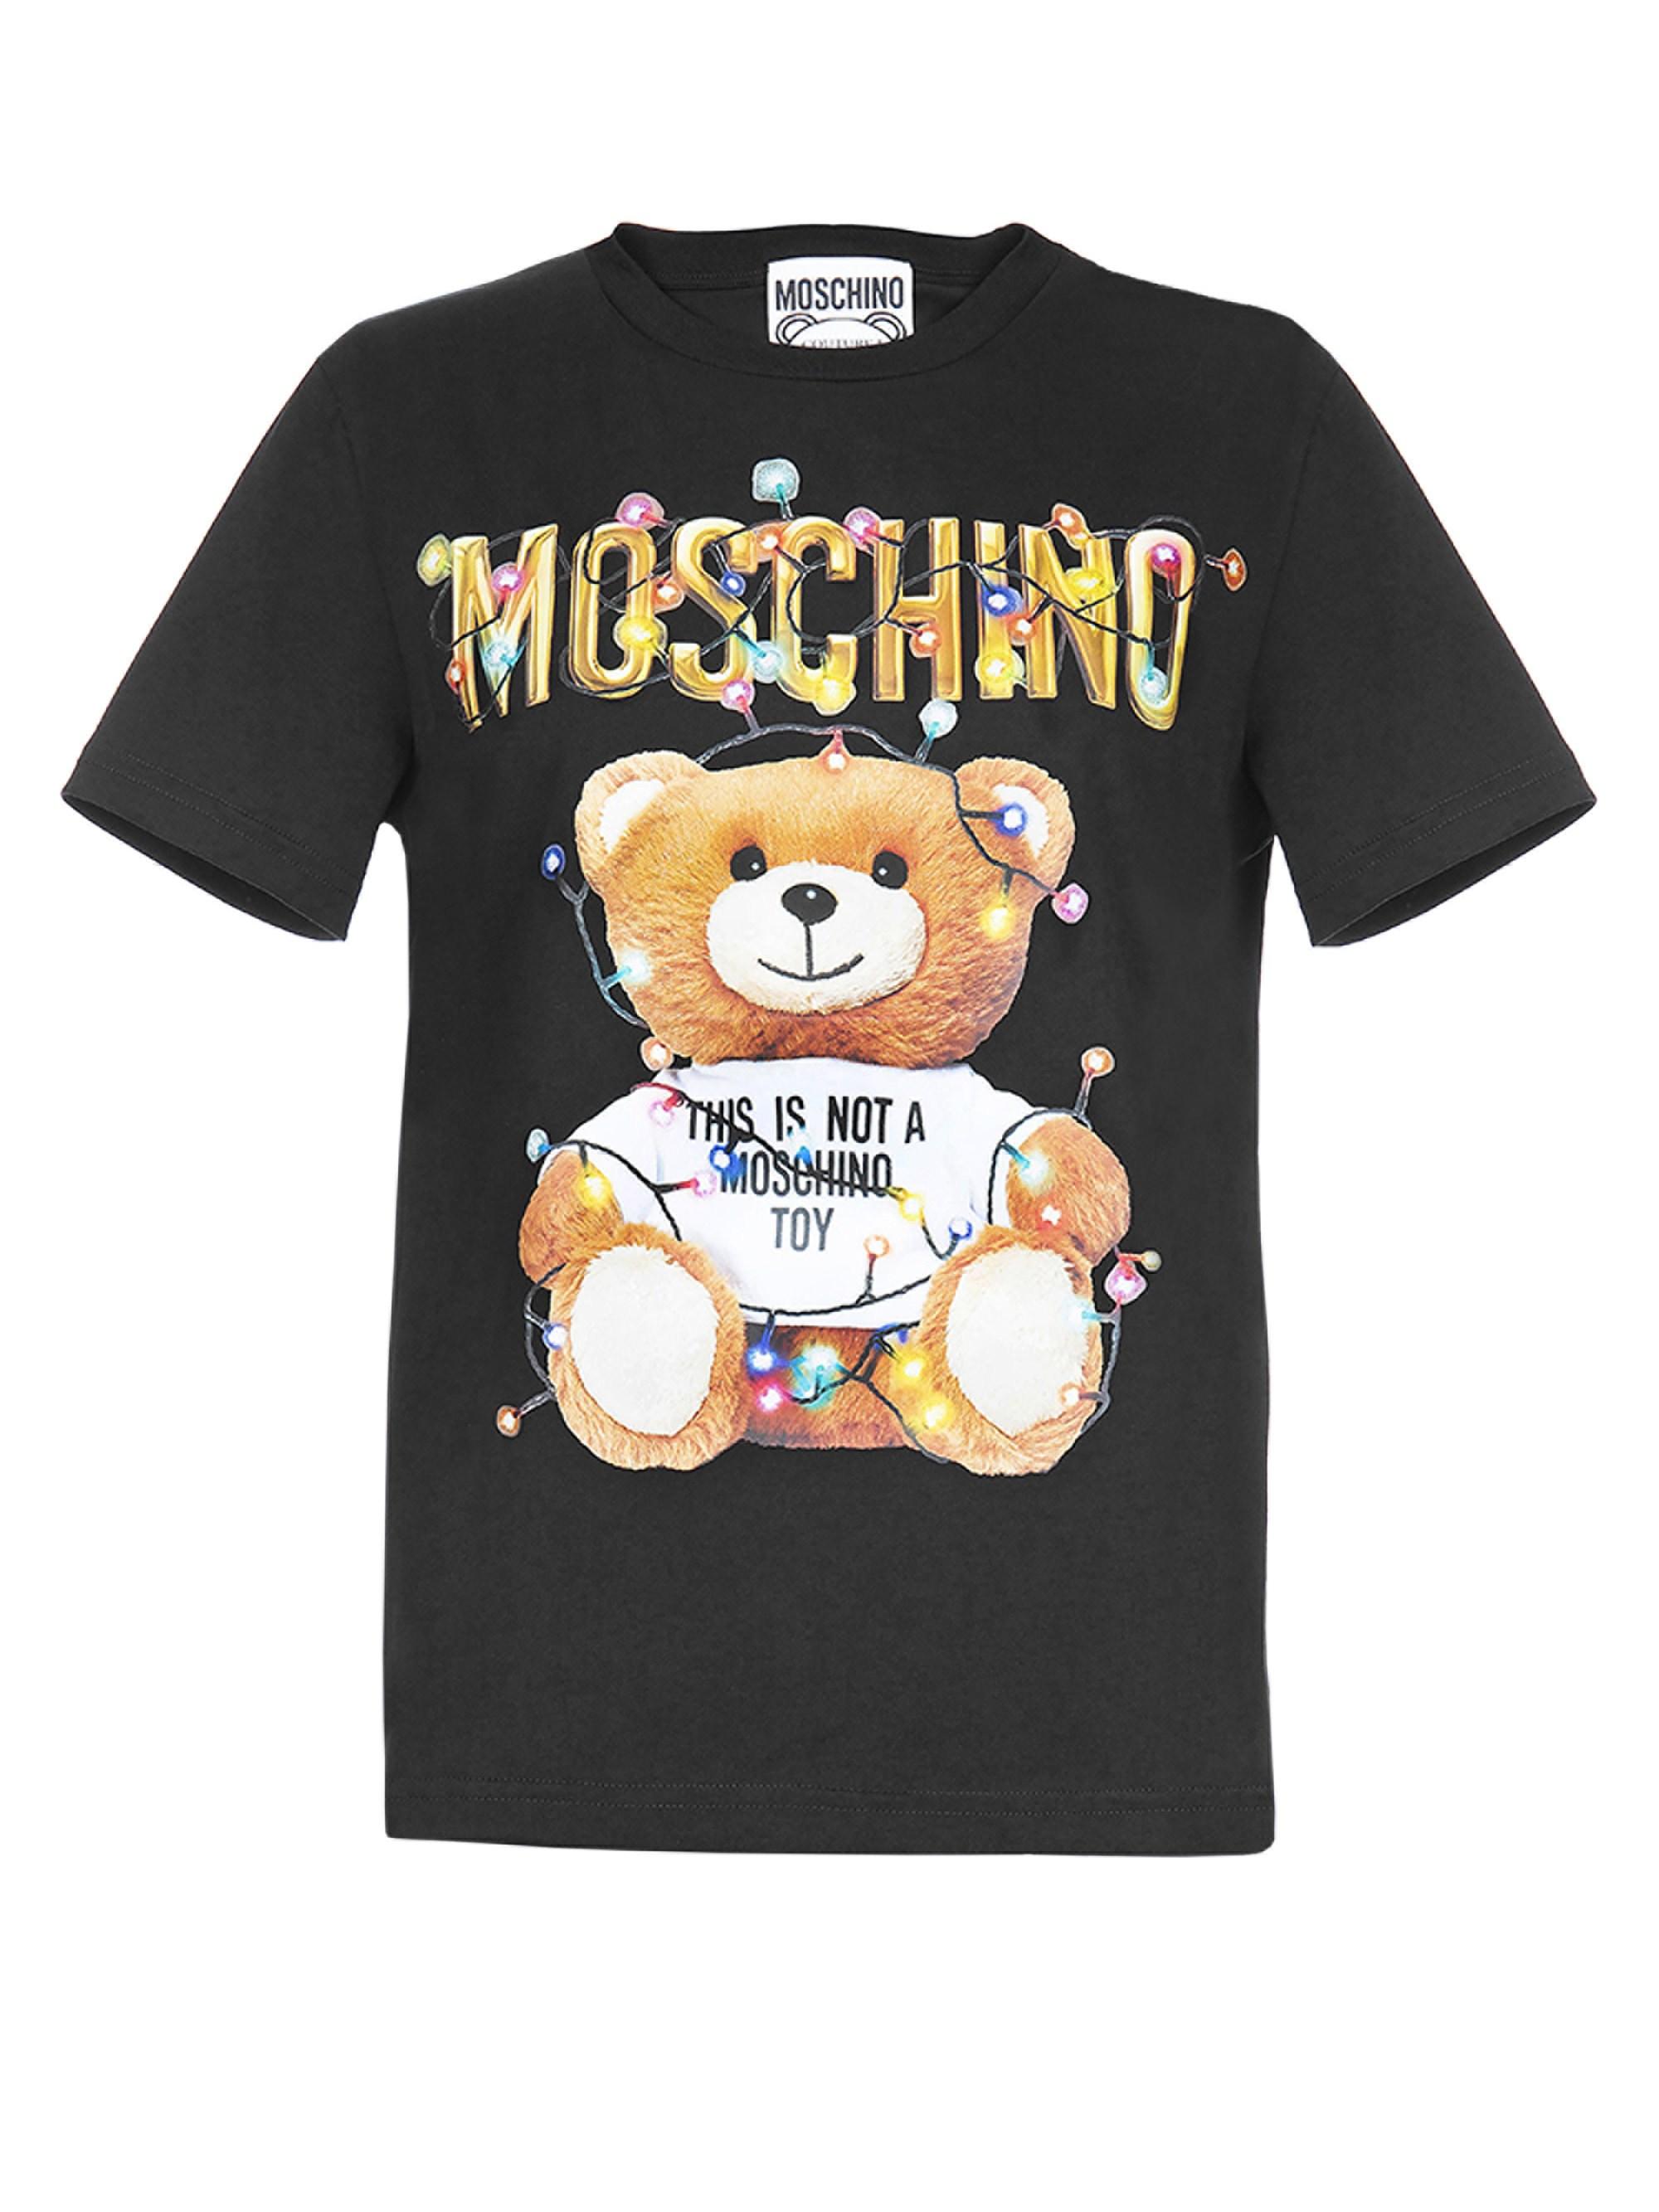 Moschino Cotton Toy Print T-shirt in Black - Lyst